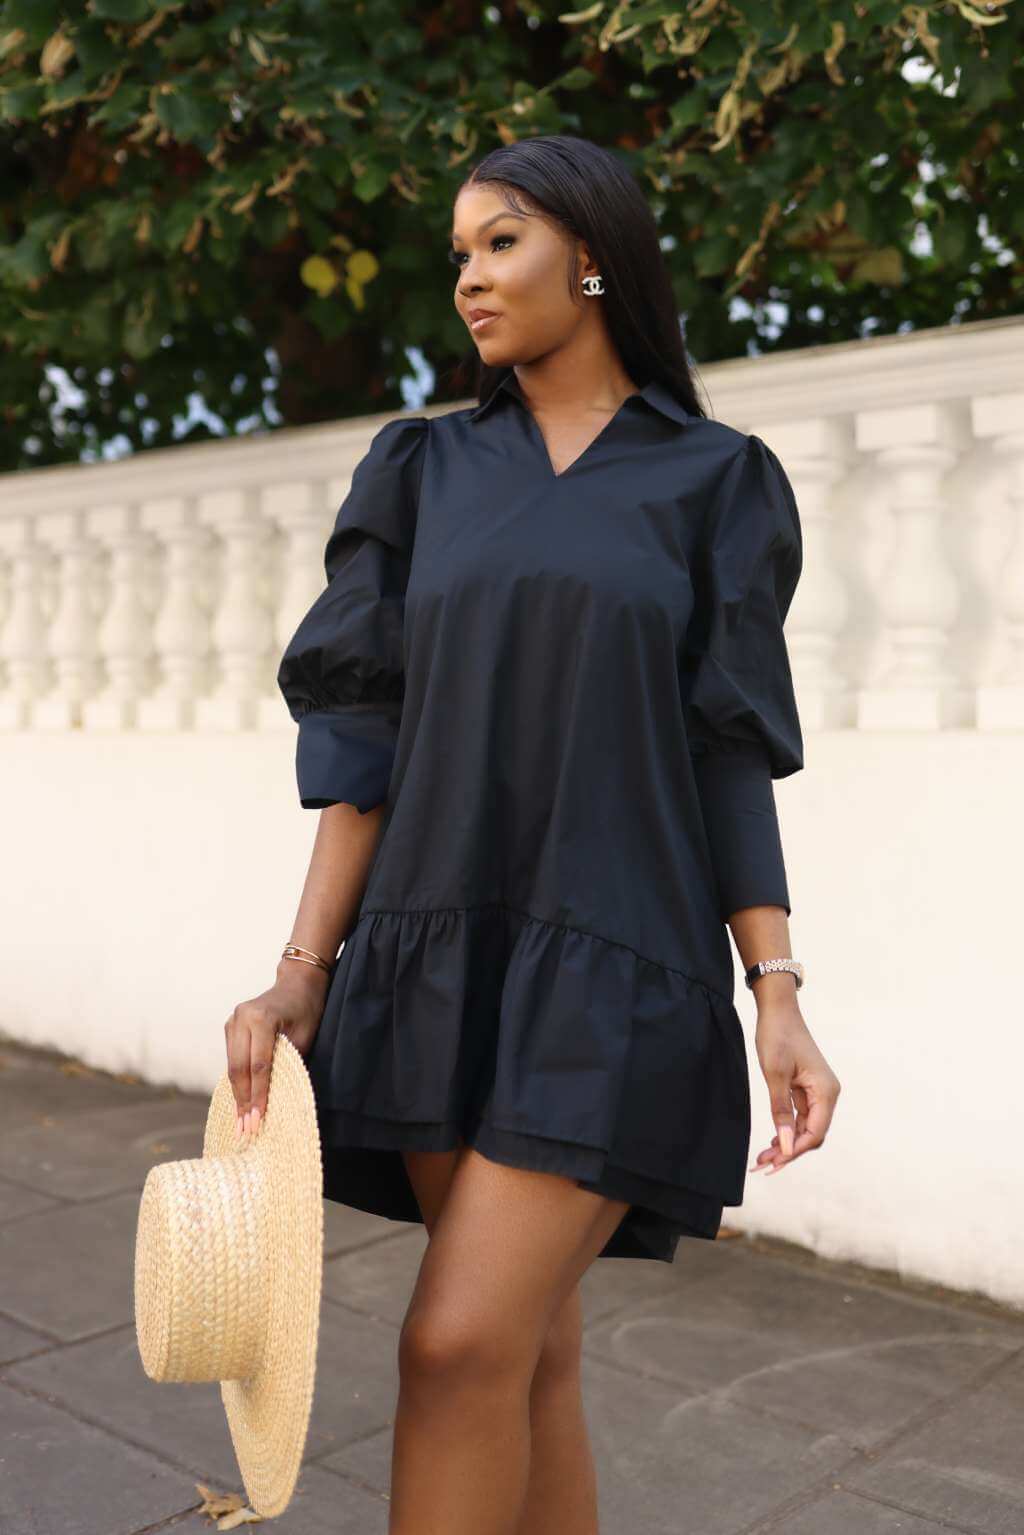 This Black Poplin Dress is a definition of elegance. When designing this timeless dress, we wanted to give you a simple yet striking masterpiece. This dress speaks for its self, just wear it and enjoy being admired.